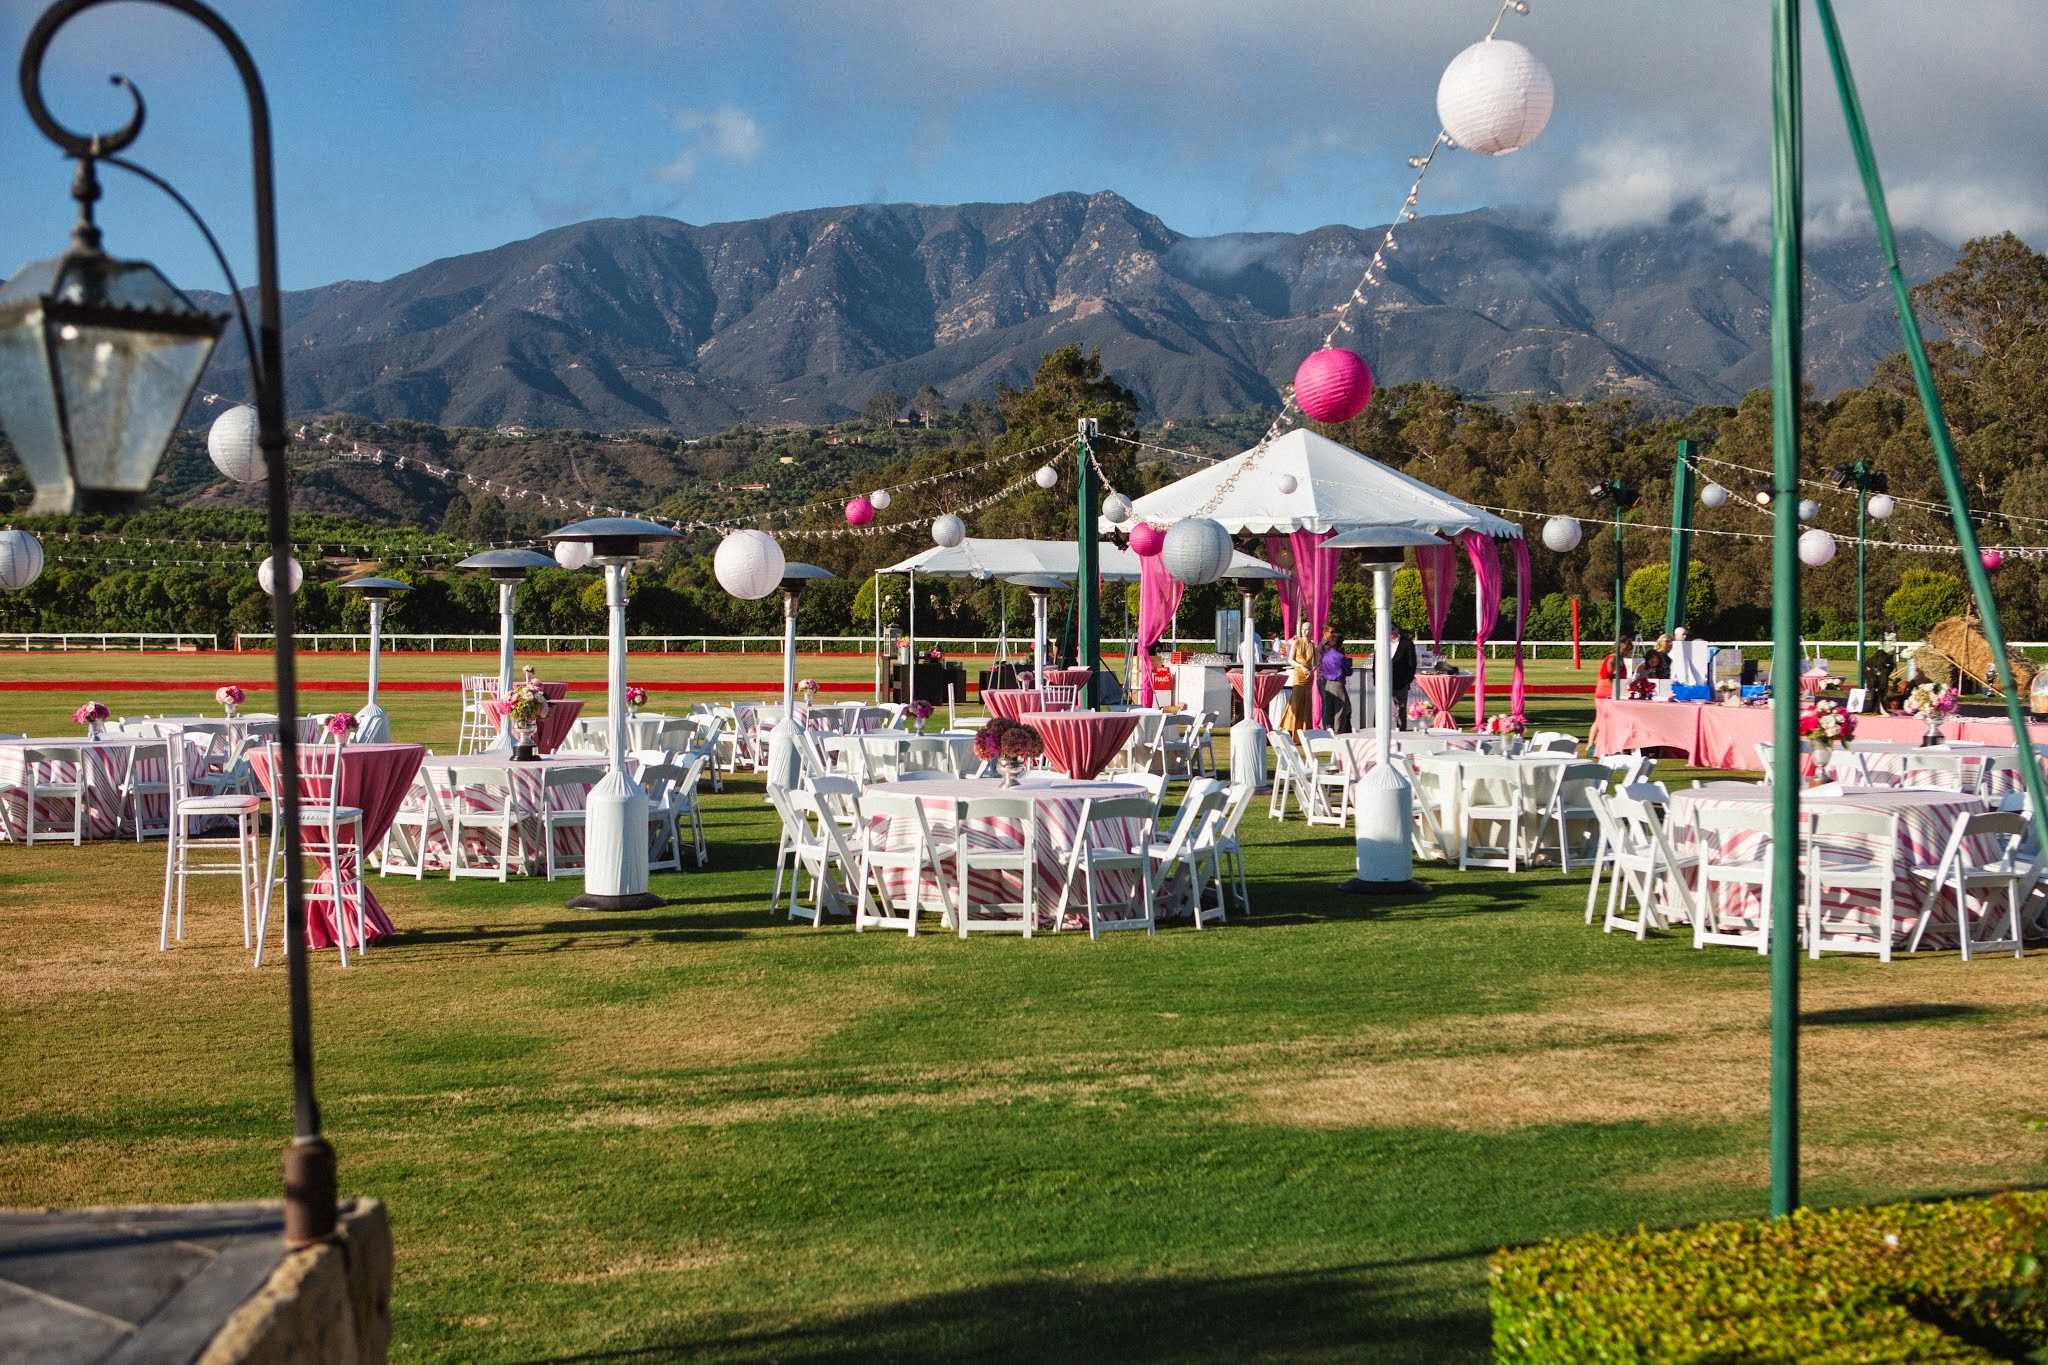 www.FeliciEvents | Pink Polo Party | Funraising Event | Felici Fundraiser | Polo Theme | Clarissa Koenig Photography | Pink Decor